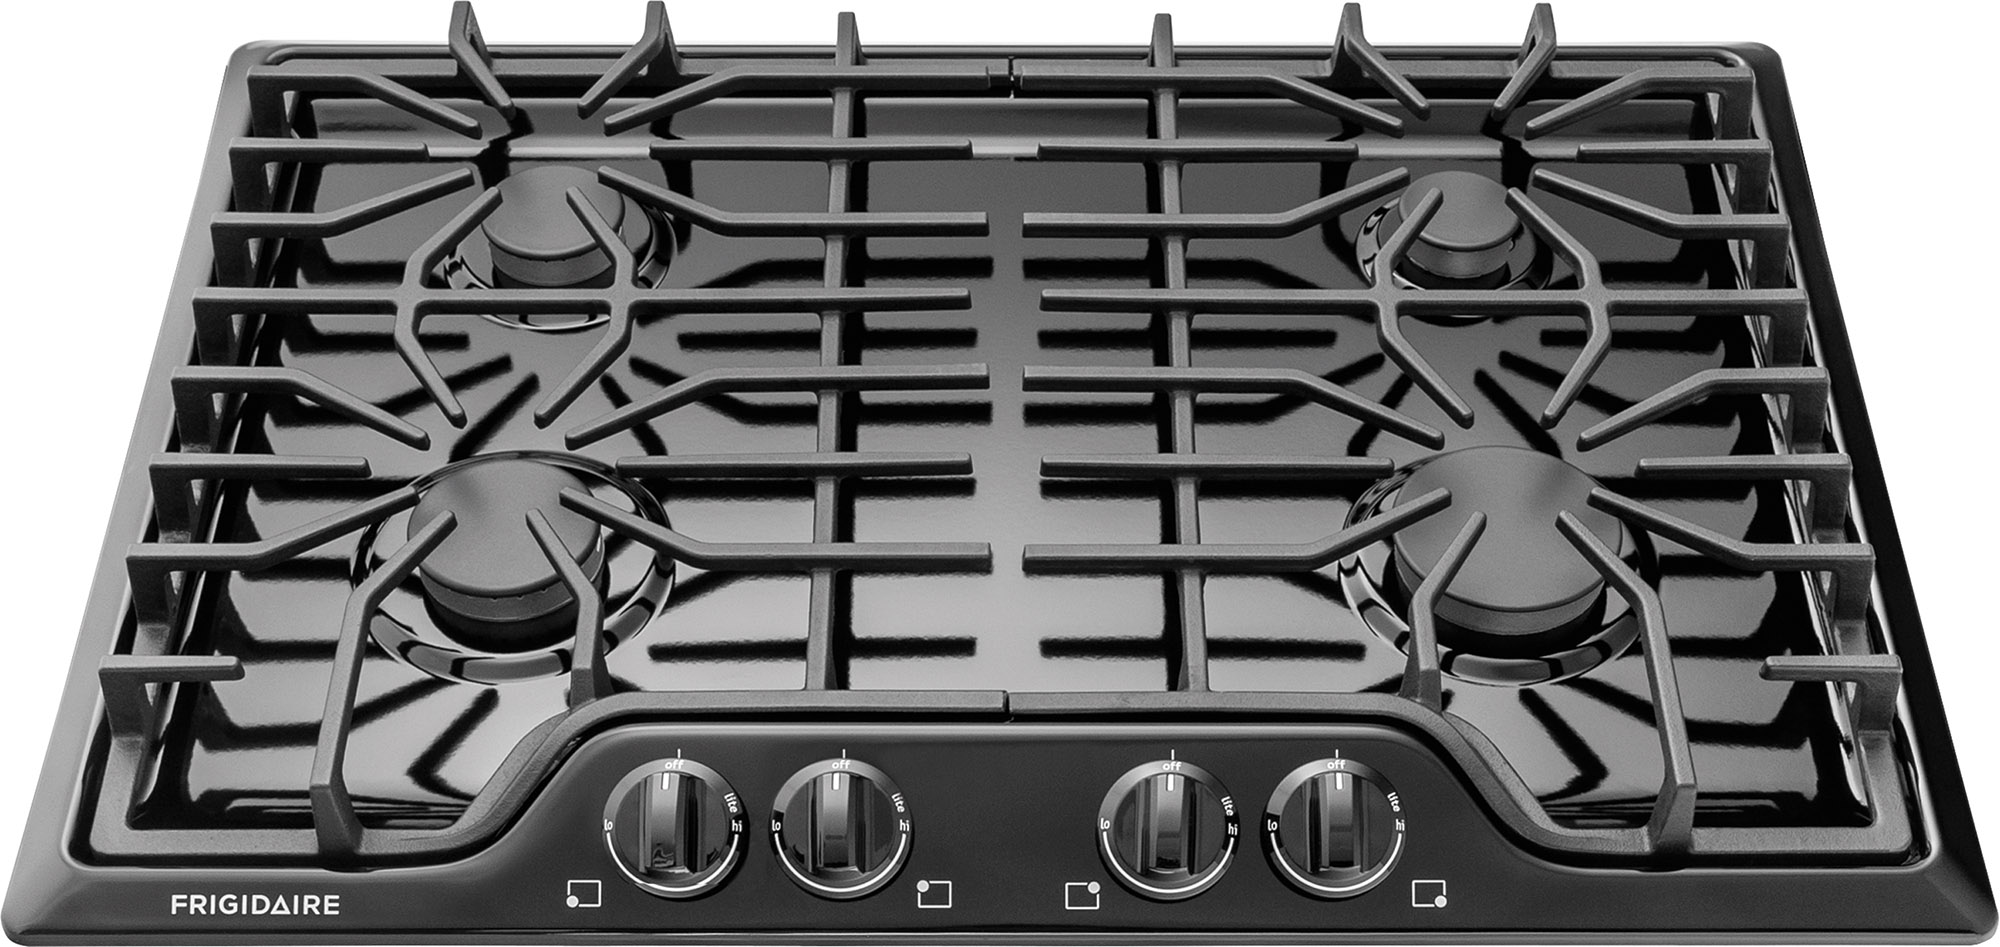 Frigidaire® 30" Stainless Steel Gas Cooktop-FFGC3026SS